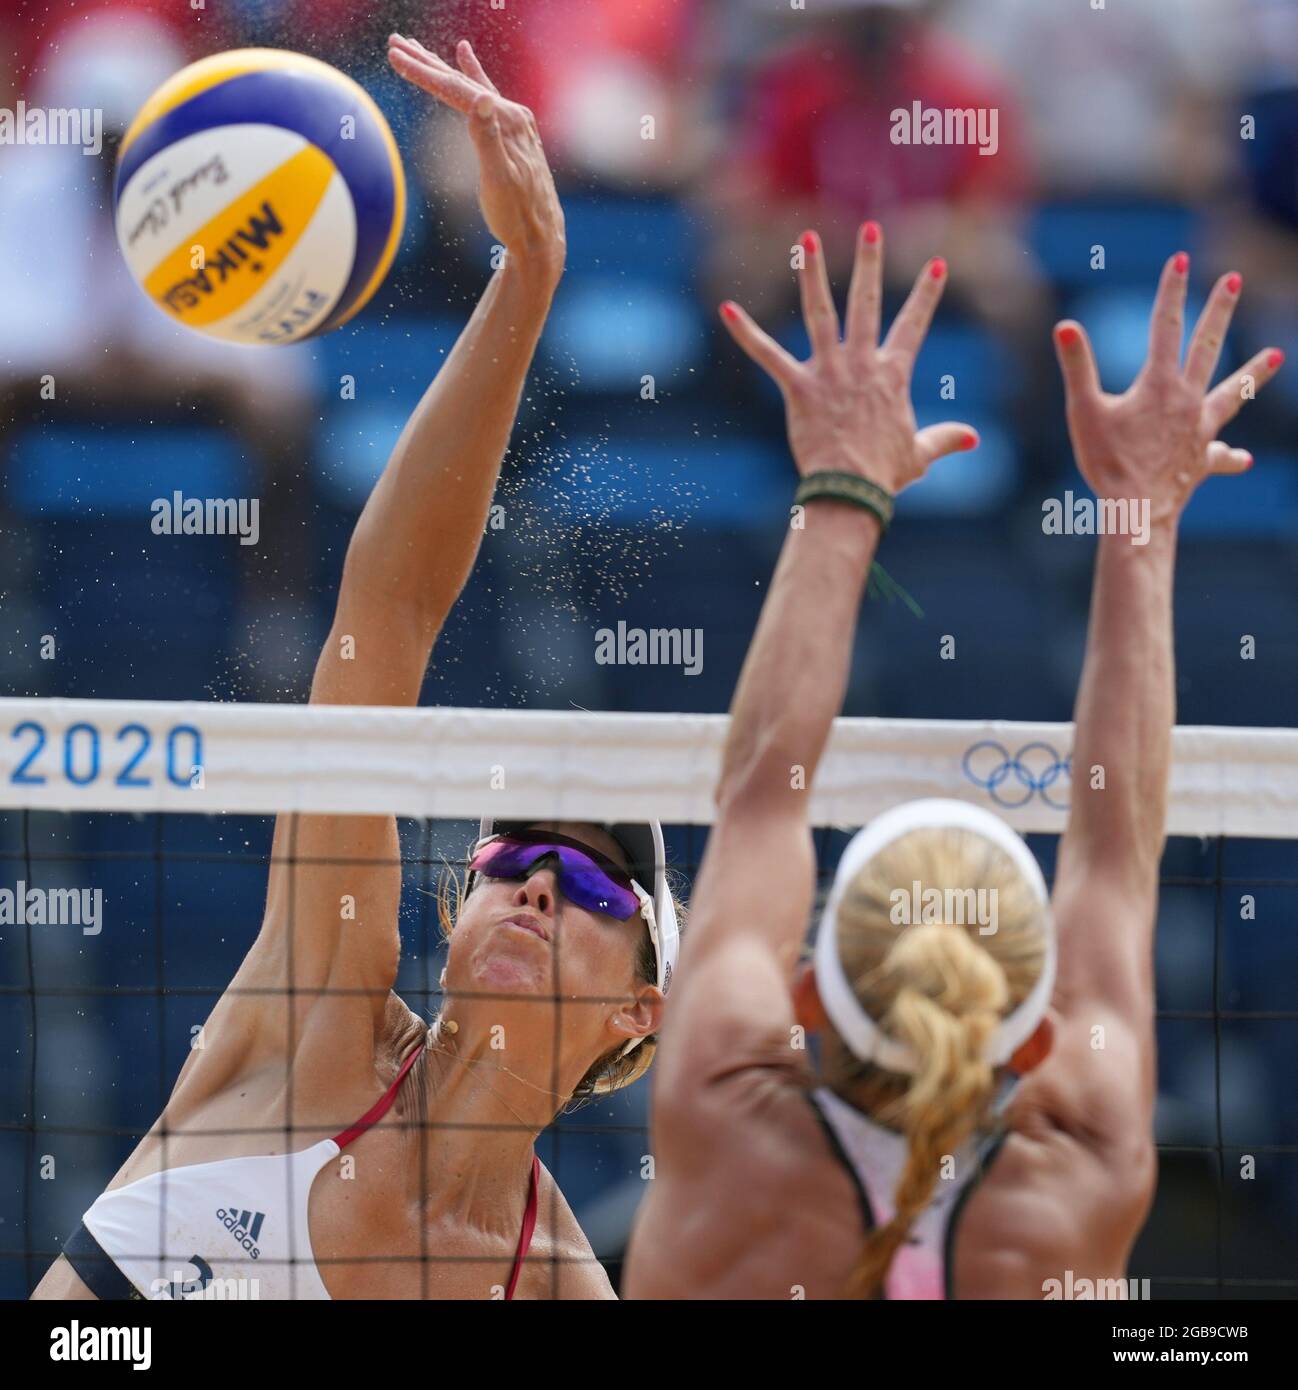 Tokyo, Japan. 3rd Aug, 2021. Alix Klineman (L) of the United States spikes during the women's quarterfinal match of beach volleyball between Germany's Laura Ludwig/Margareta Kozuch and April Ross/Alix Klineman of the United States at the Tokyo 2020 Olympic Games in Tokyo, Japan, Aug. 3, 2021. Credit: Li He/Xinhua/Alamy Live News Stock Photo